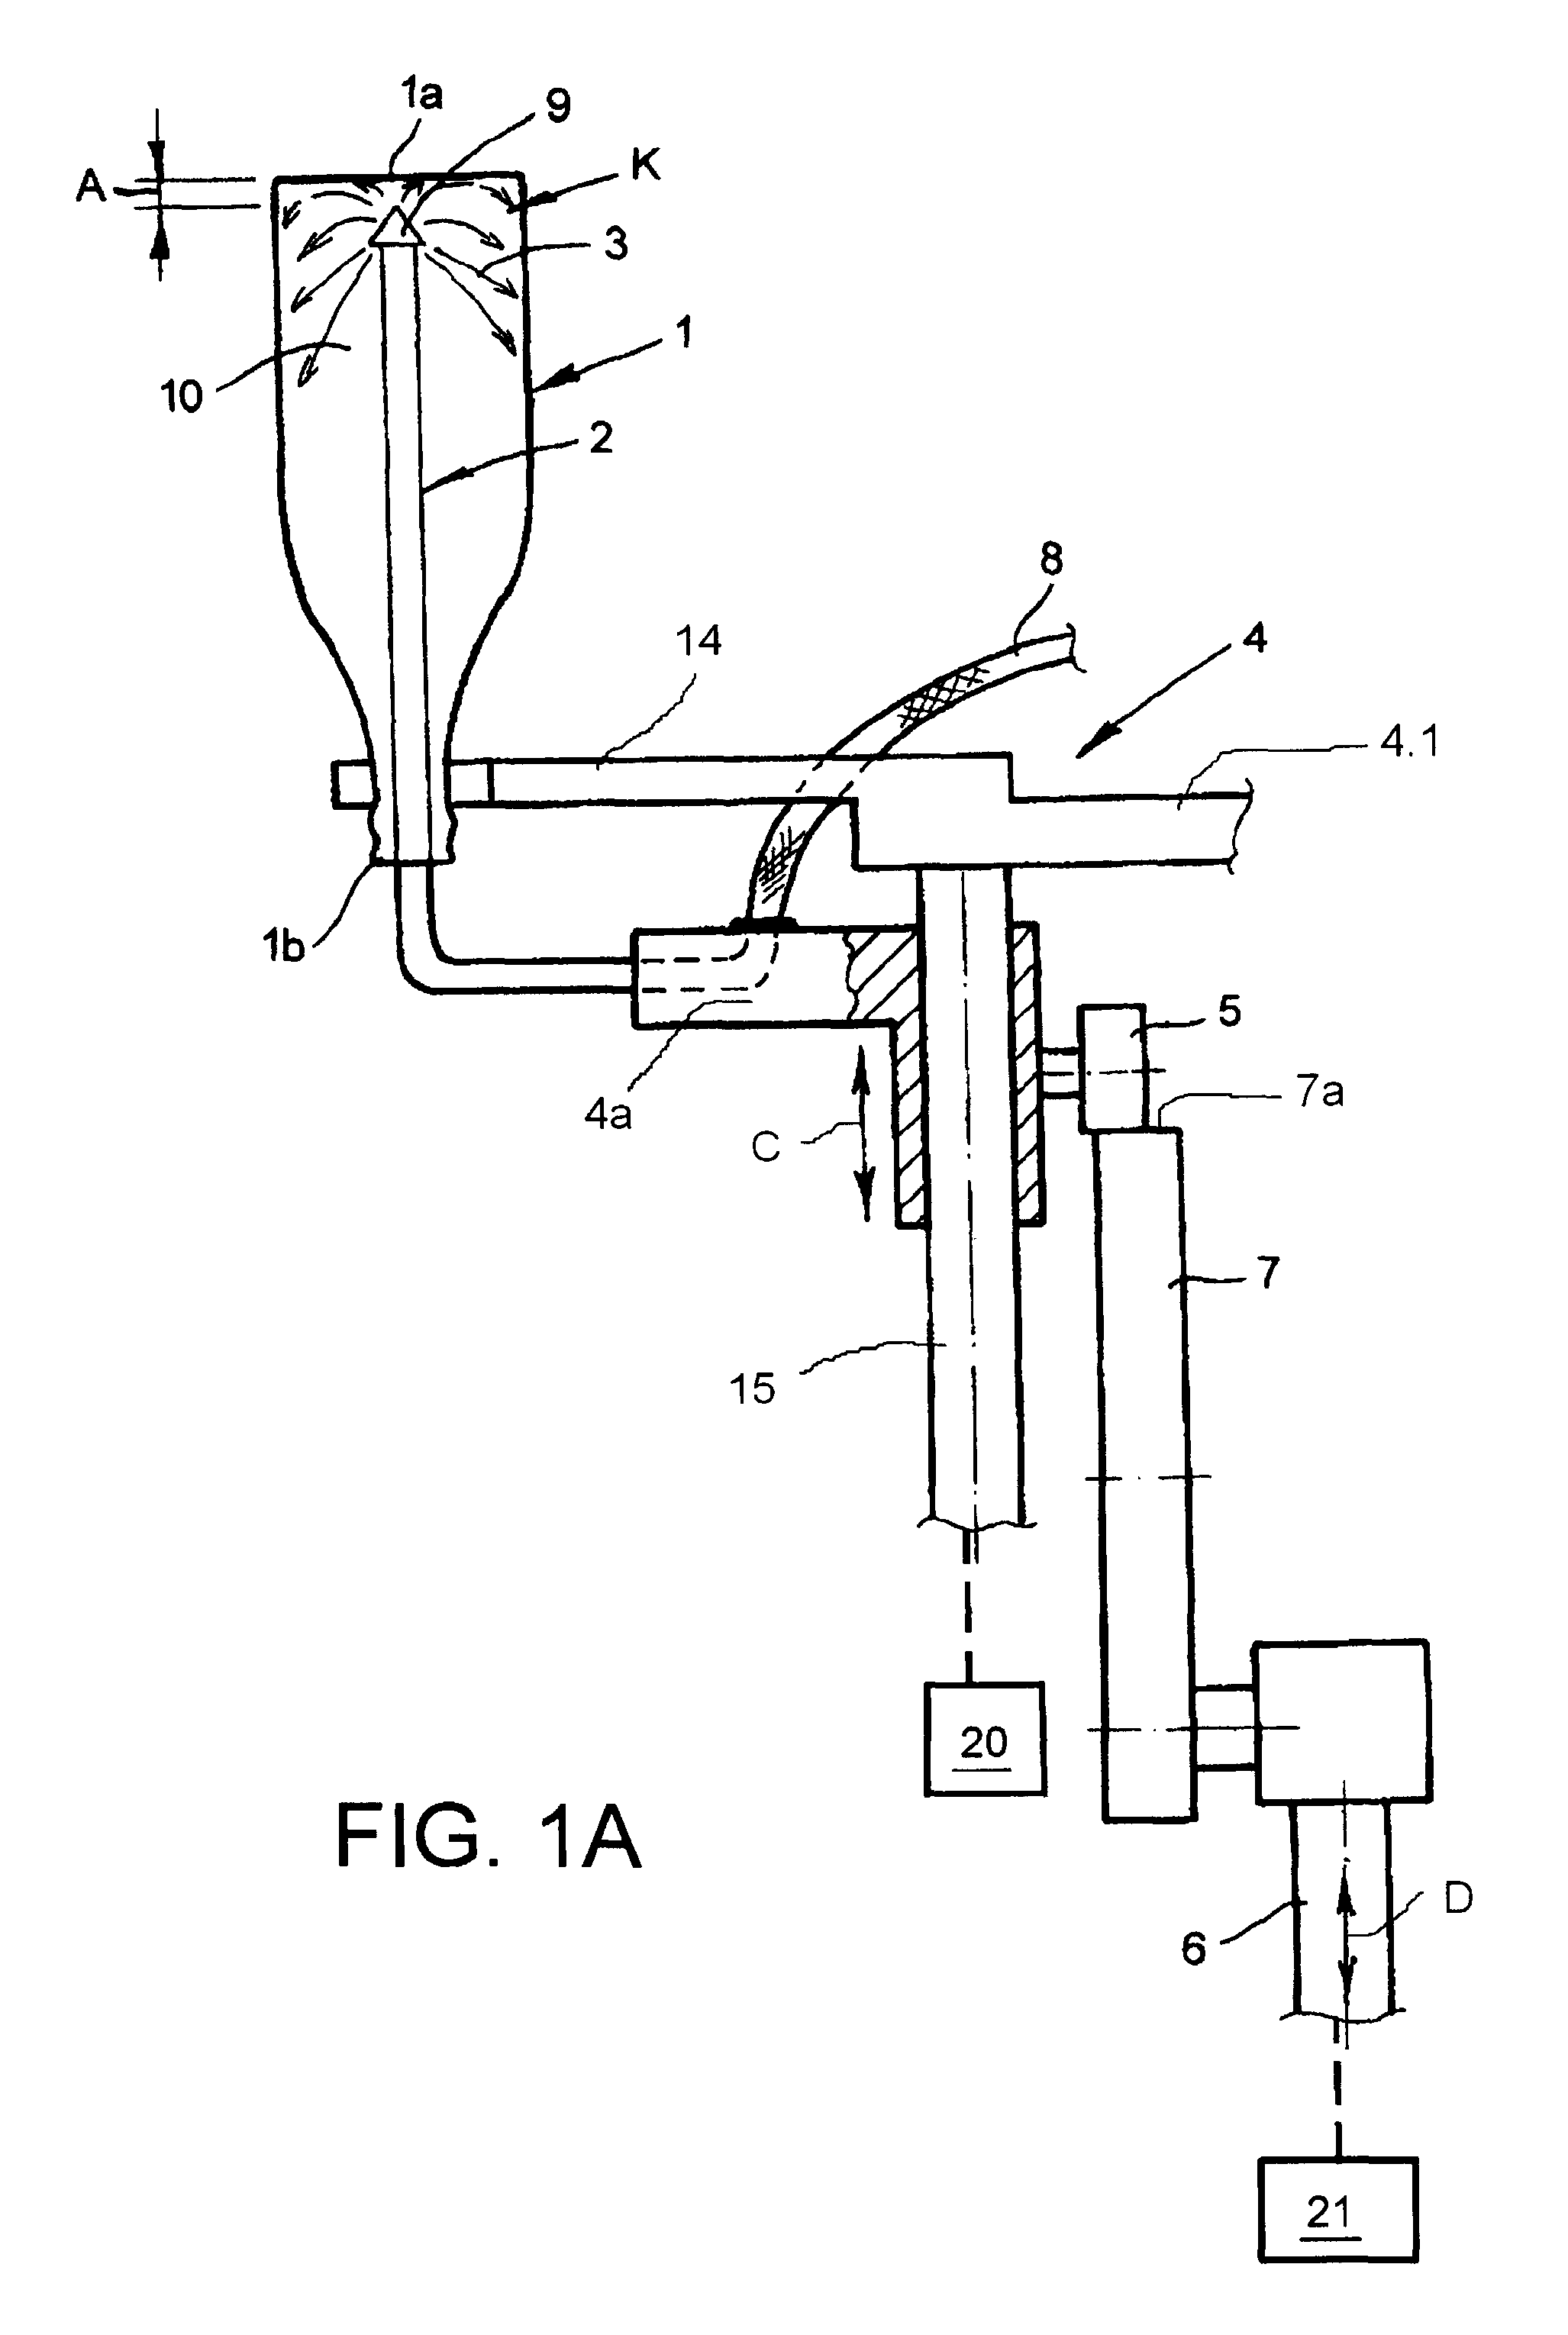 Method of cleaning beverage bottles in a beverage bottling plant, a method of cleaning containers in a container filling plant, and an apparatus therefor